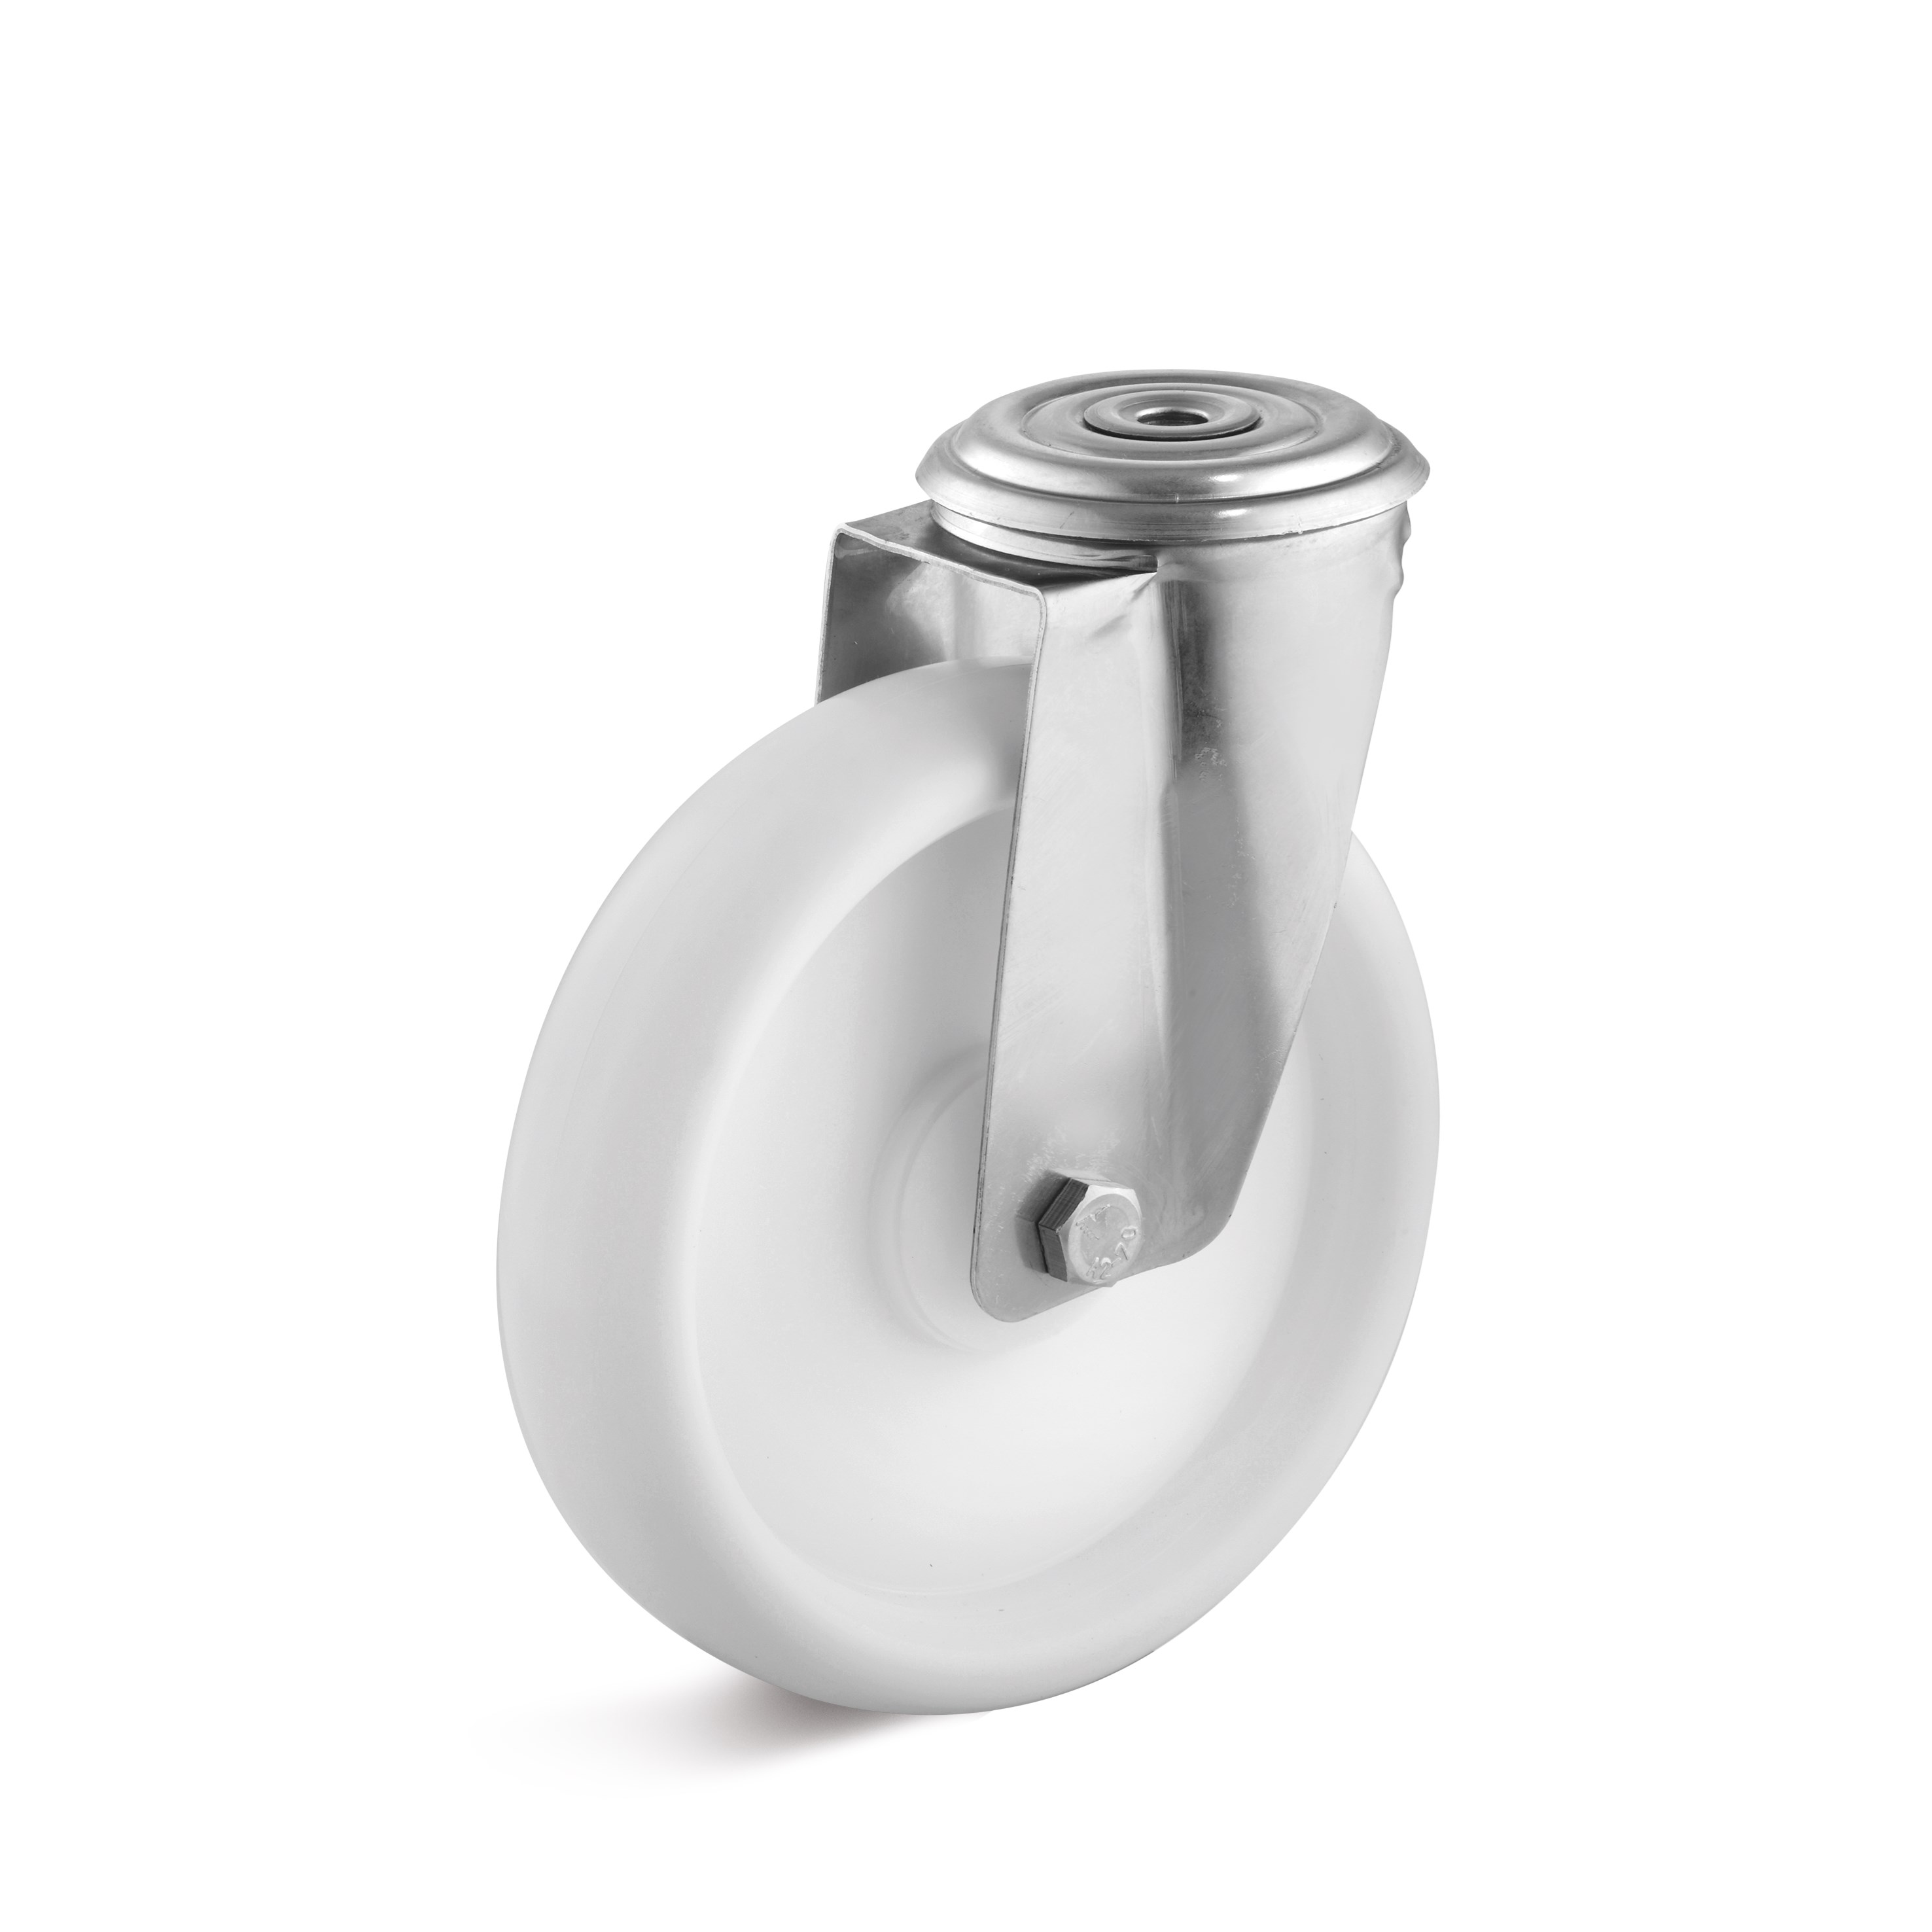 Stainless steel swivel castor with back hole and polypropylene wheel L-IV-PPBL-160-K-1